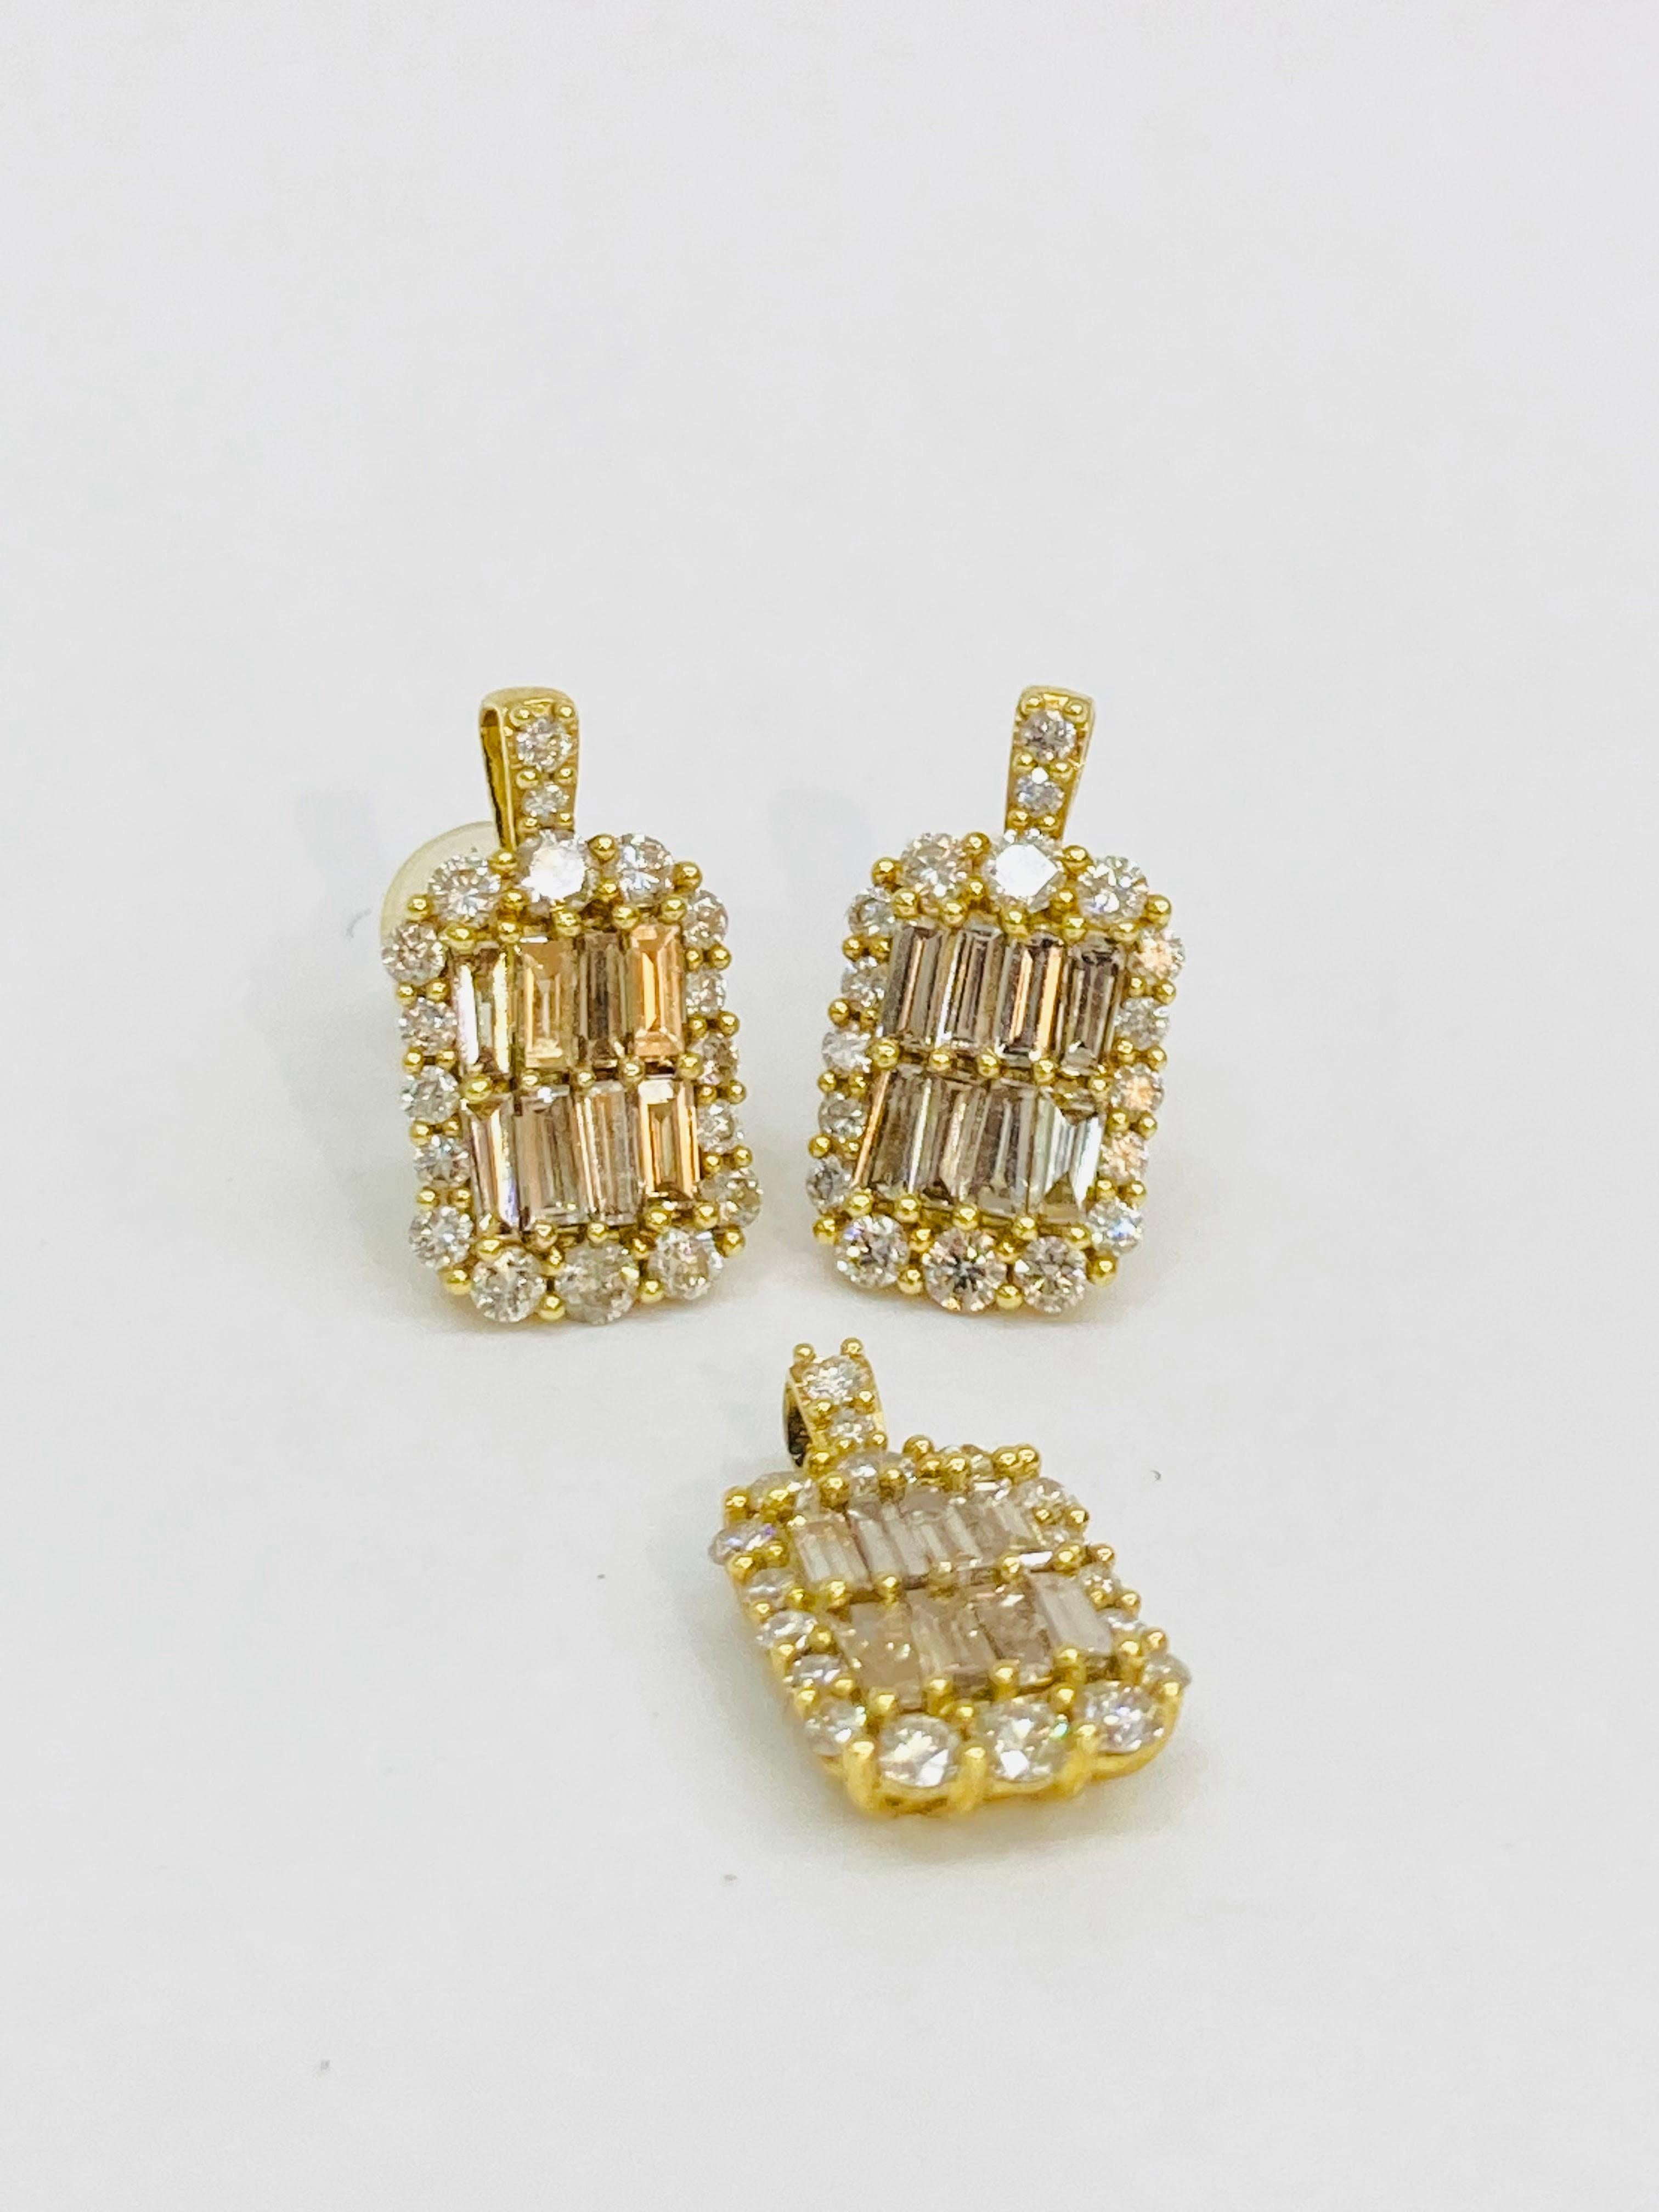 Bochic “Retro Vintage” Diamond Retro Set, Earrings & Pendent Set In 18K Gold 

Diamonds 2.10 Carat 
F color 
VS clarity 
18K Yellow Gold
5.10 Gram

This Pendent and Earrings Set is from the 